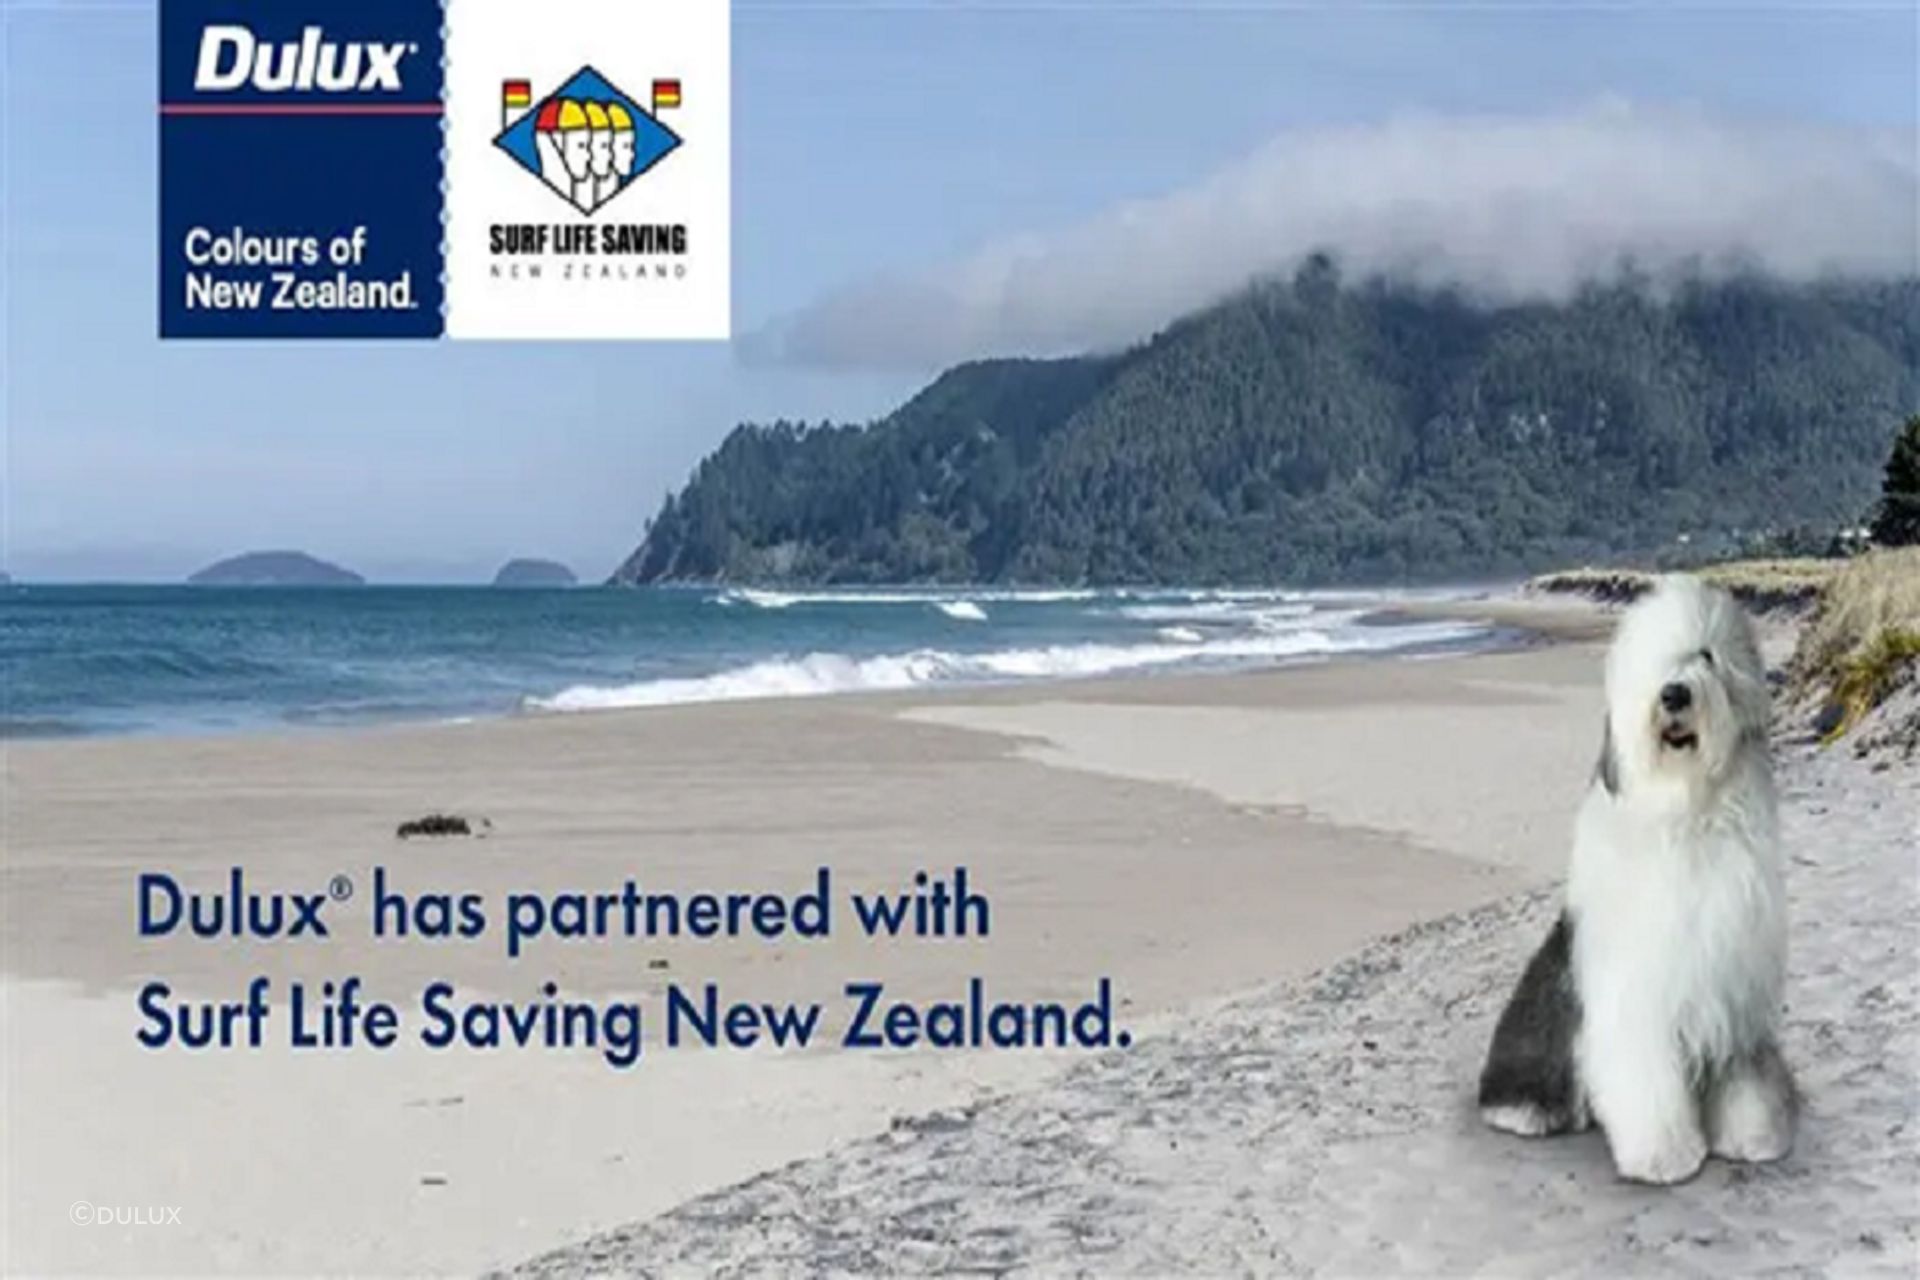 Surf-Life-Saving-New-Zealand-and-Dulux-Colours-of-New-Zealand.png